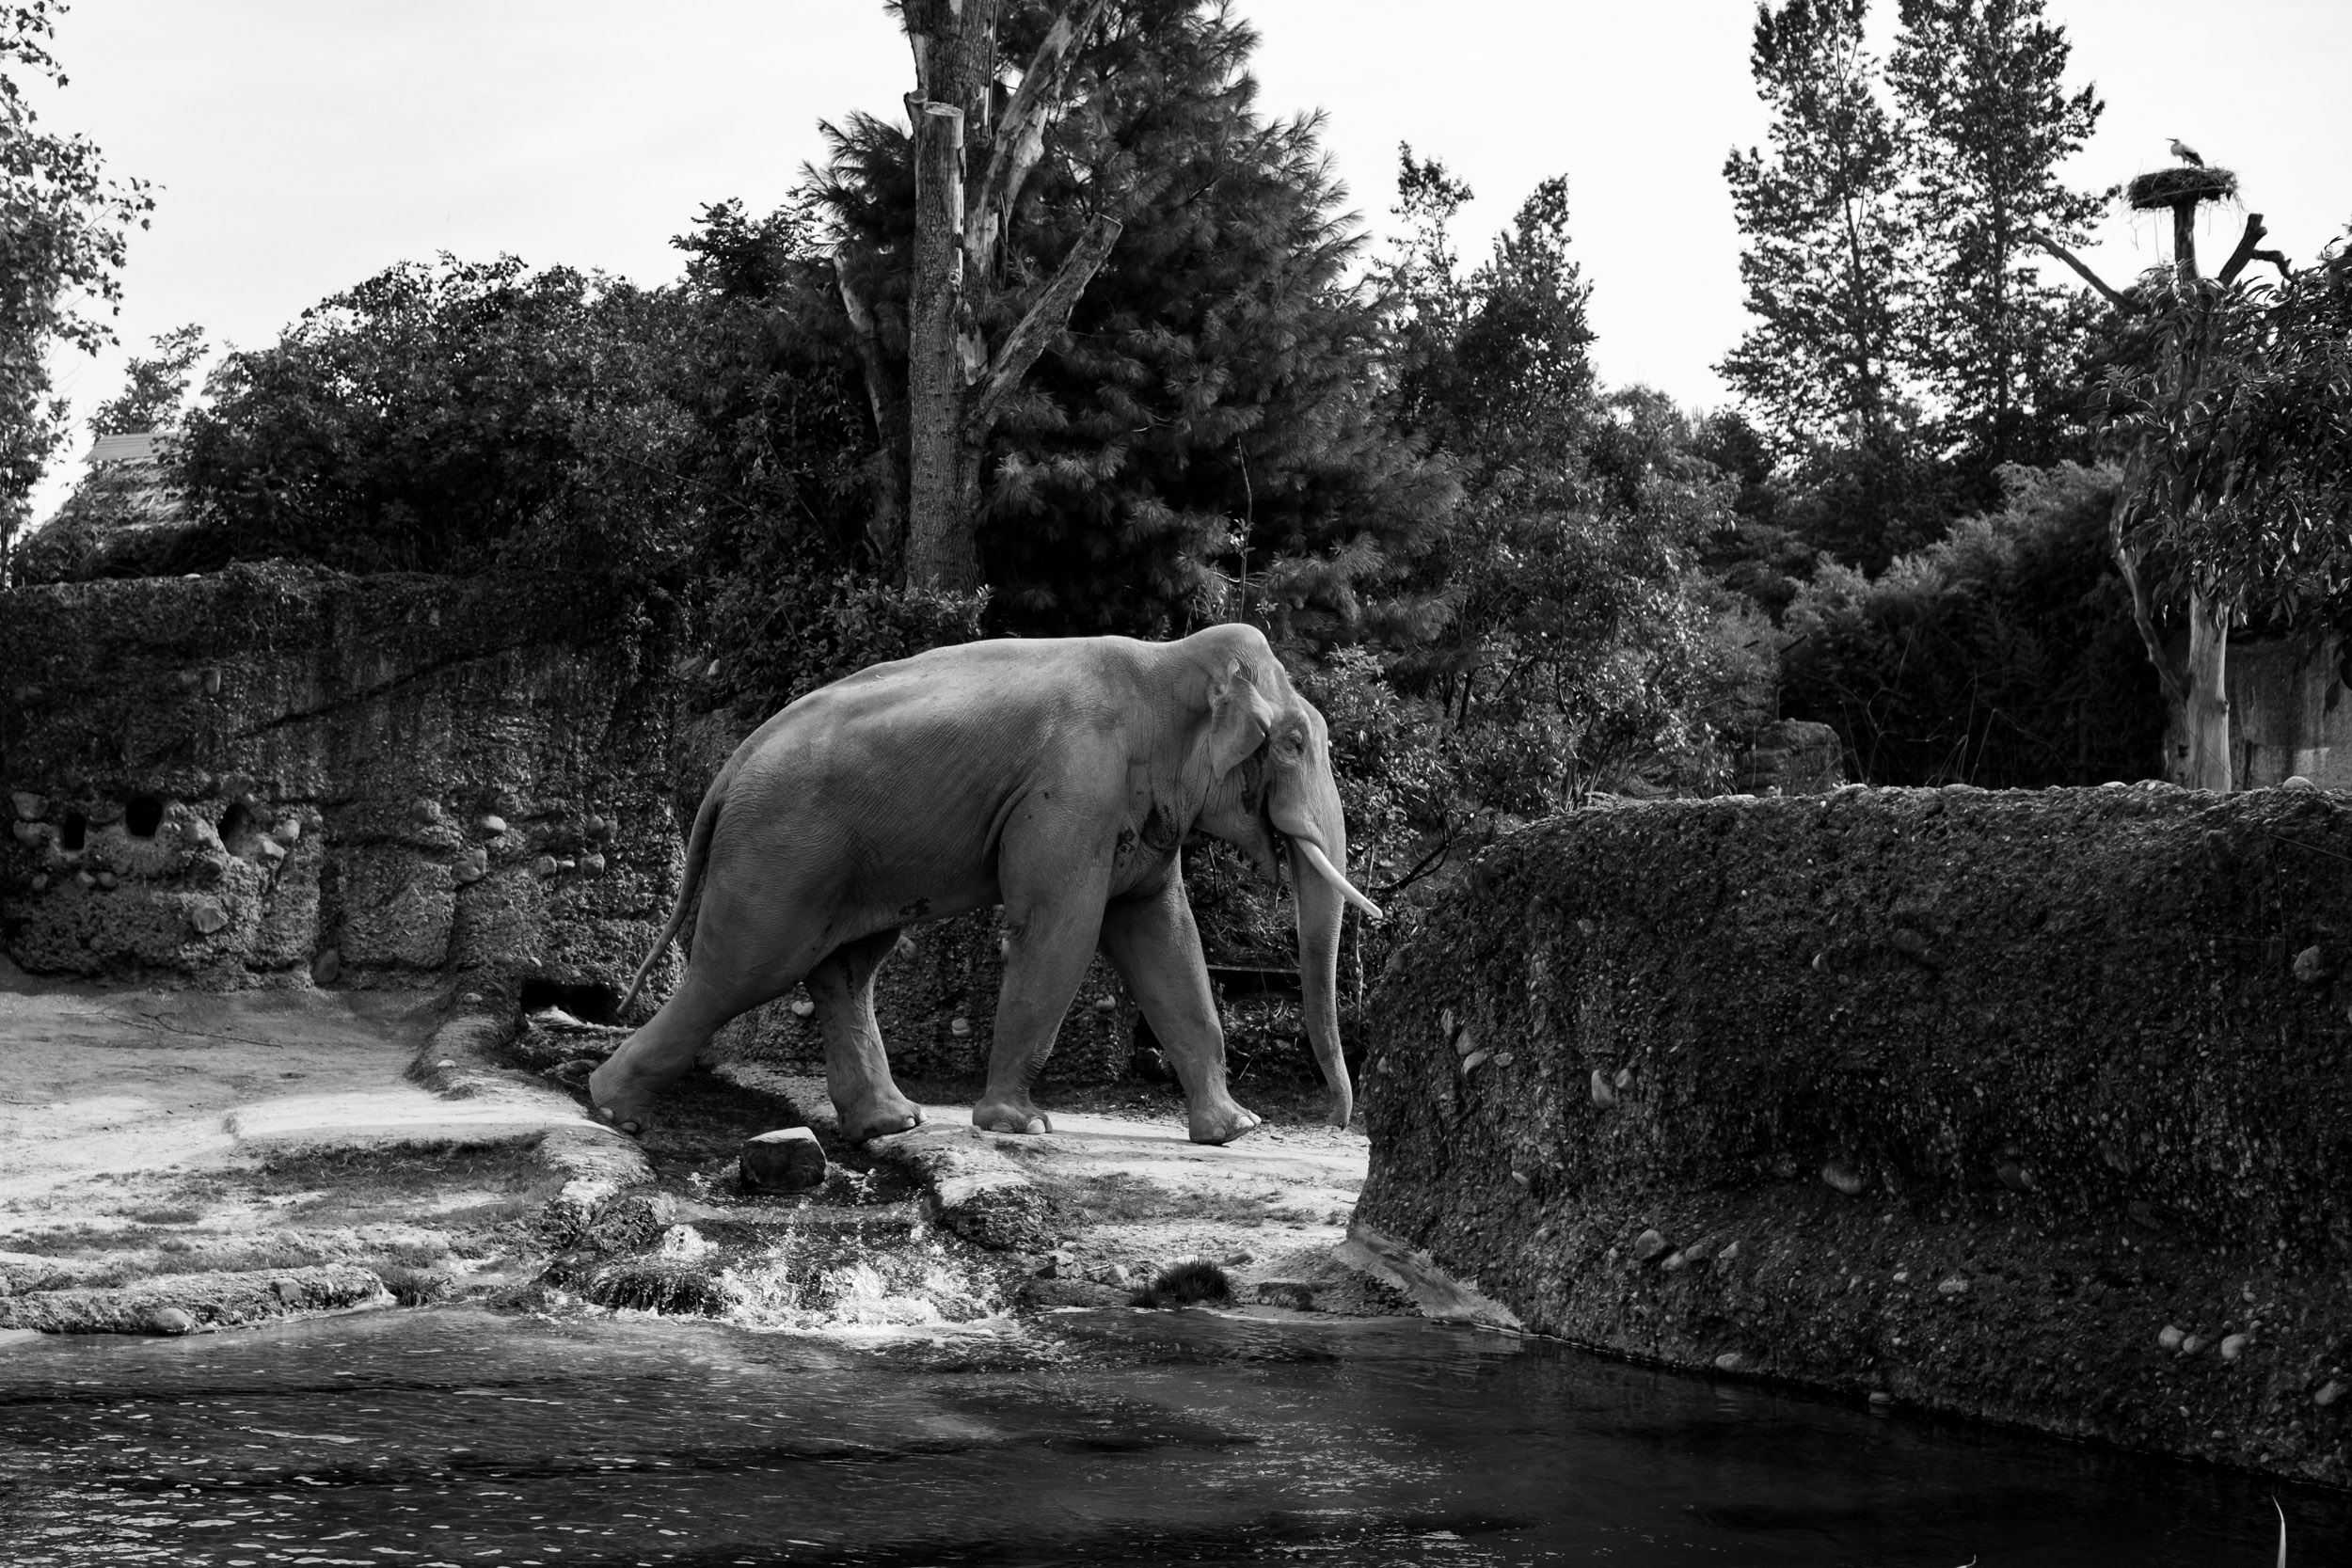 One of the elephants walking through the Kaeng Krachan elephant park at the Zoo Zurich.